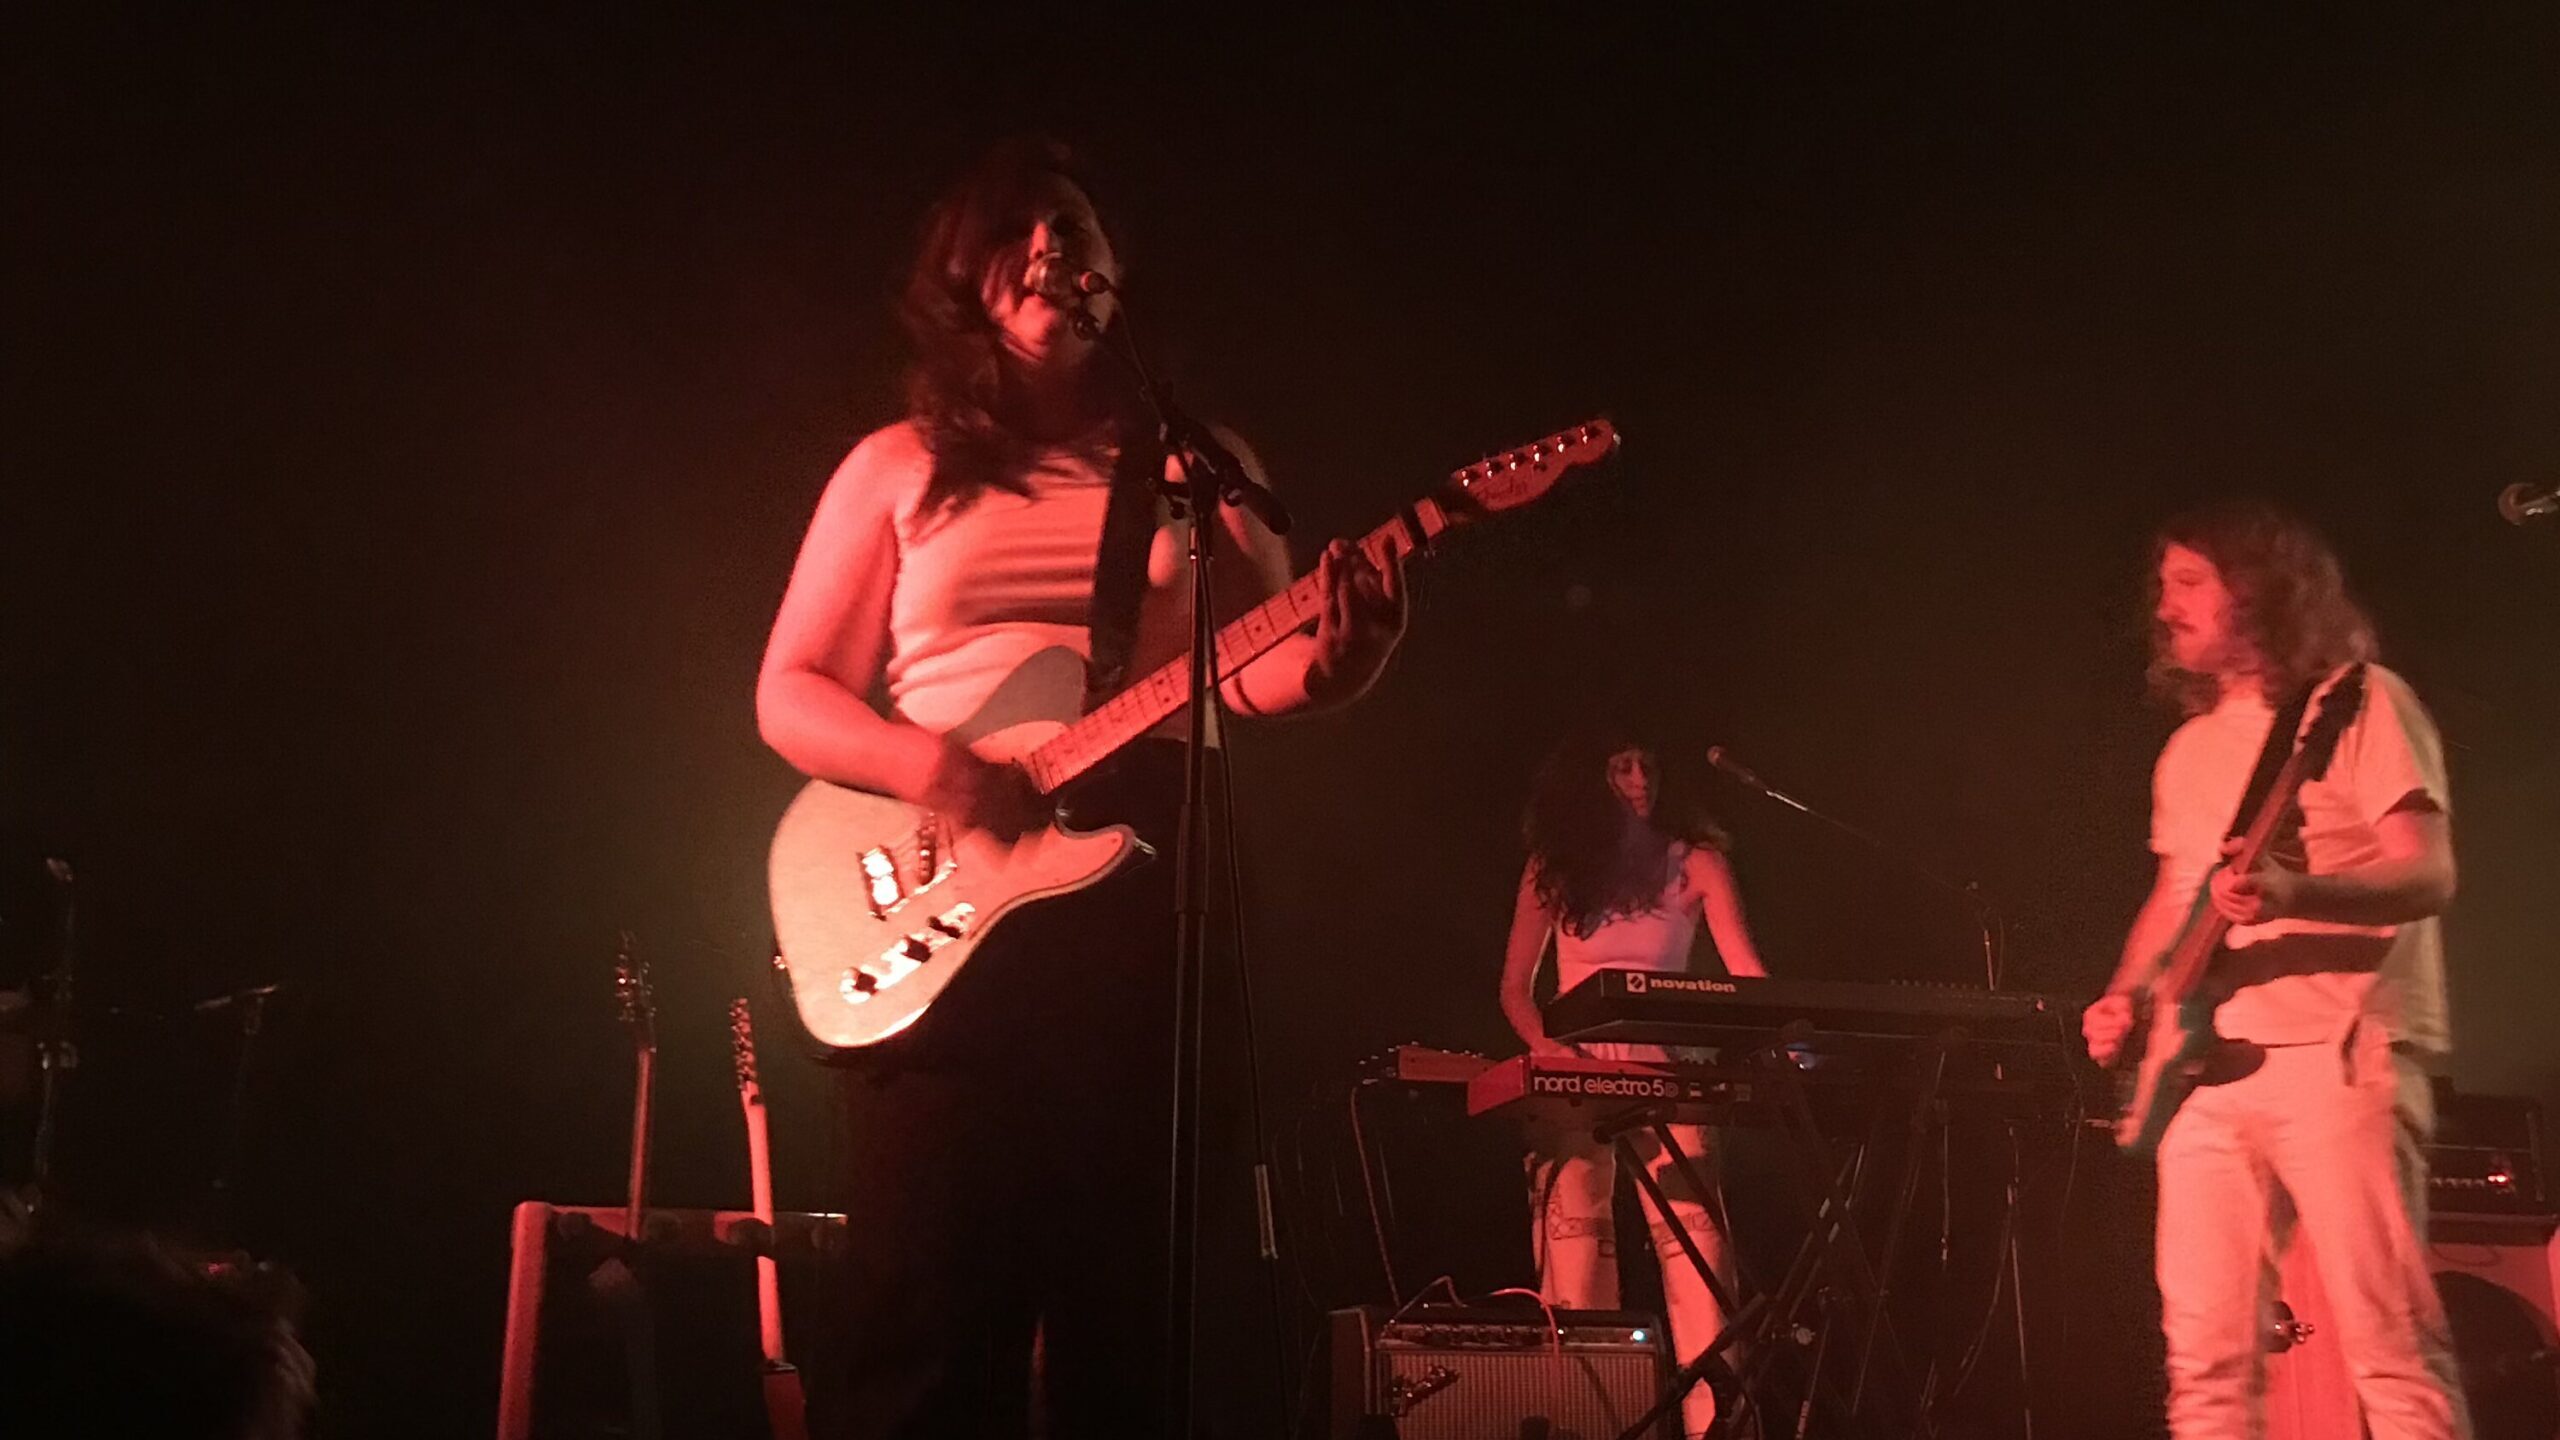 Lucy Dacus with a guitar singing into a microphone on stage.